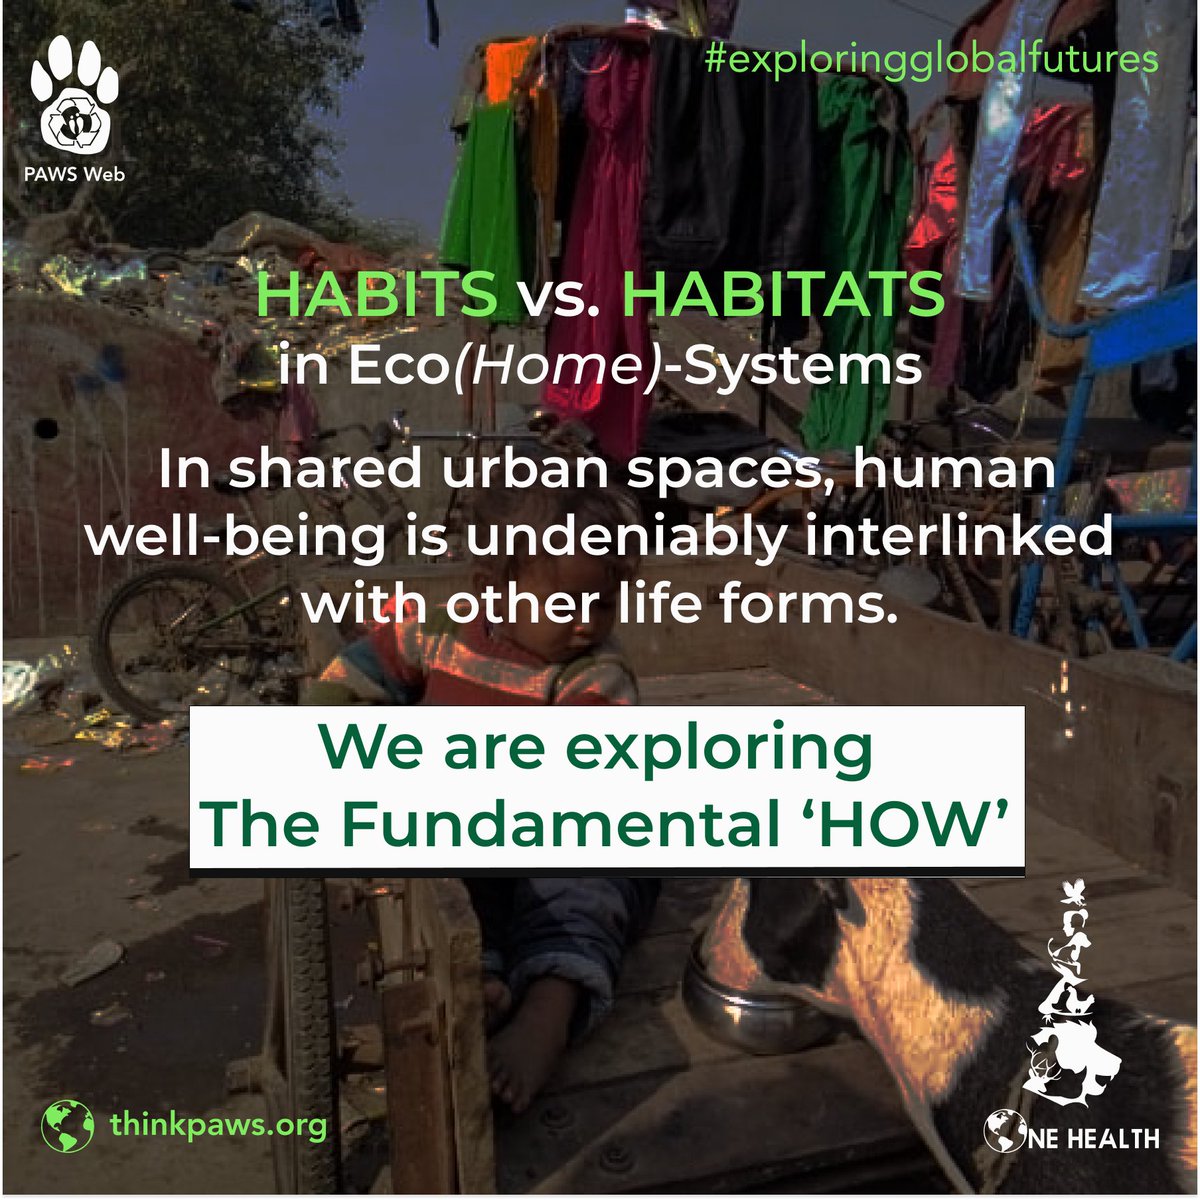 Explore the beauty in human wisdom, Homo sapiens, to coexist with other life forms. Join PAWS Web sessions to discuss the magic and challenges of fostering understanding & compassion for non-kins in modern urbanity. Email us at connect@thinkpaws.org #Coexistence #urban #ecology